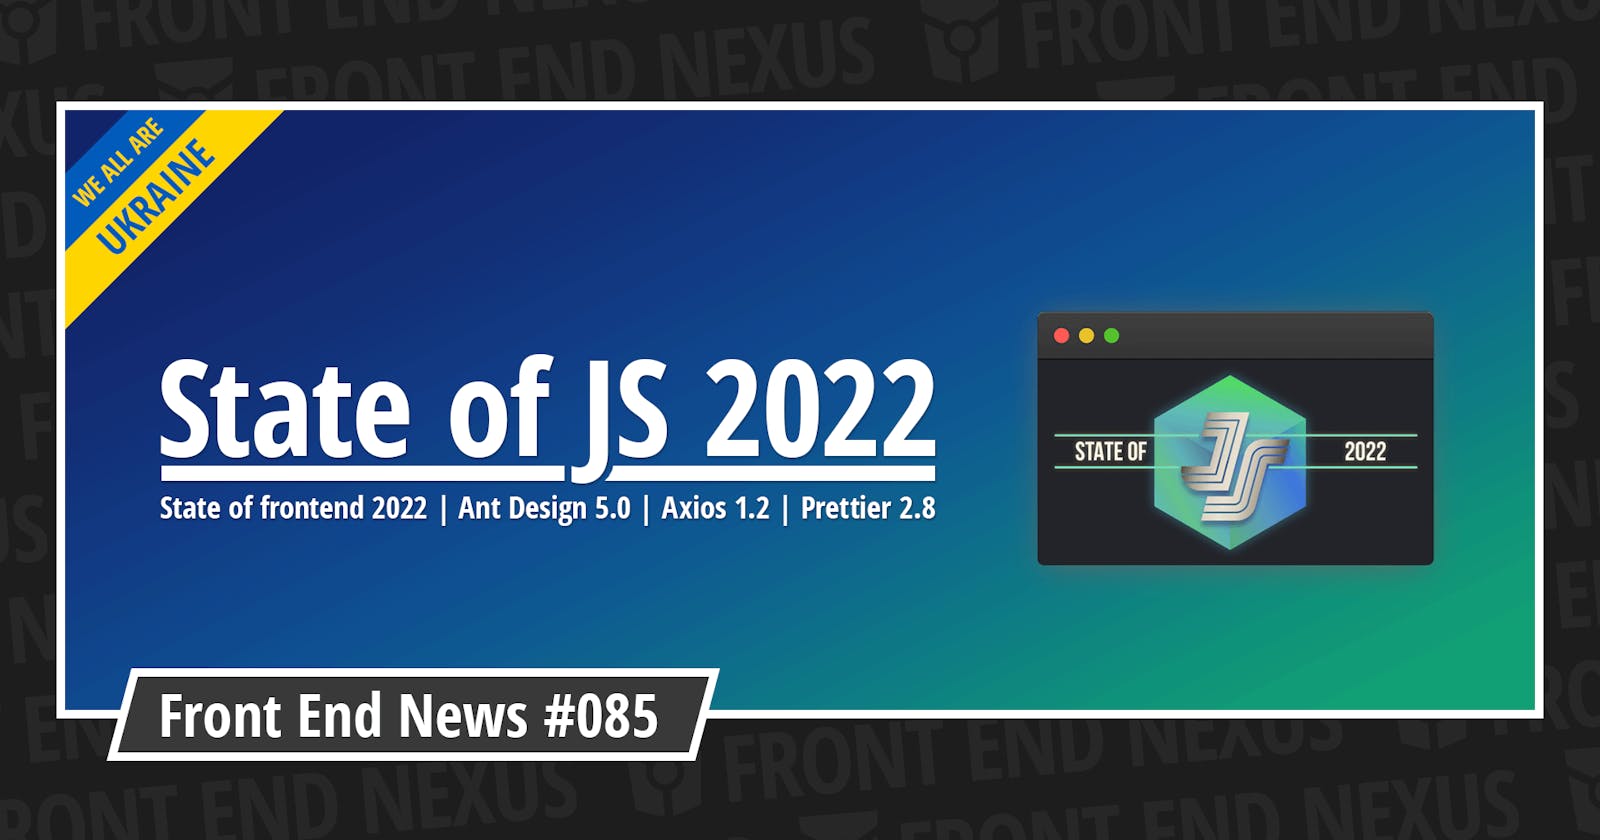 State of JS 2022, State of frontend 2022, Ant Design 5.0, Axios 1.2, Prettier 2.8, and more | Front End News #085